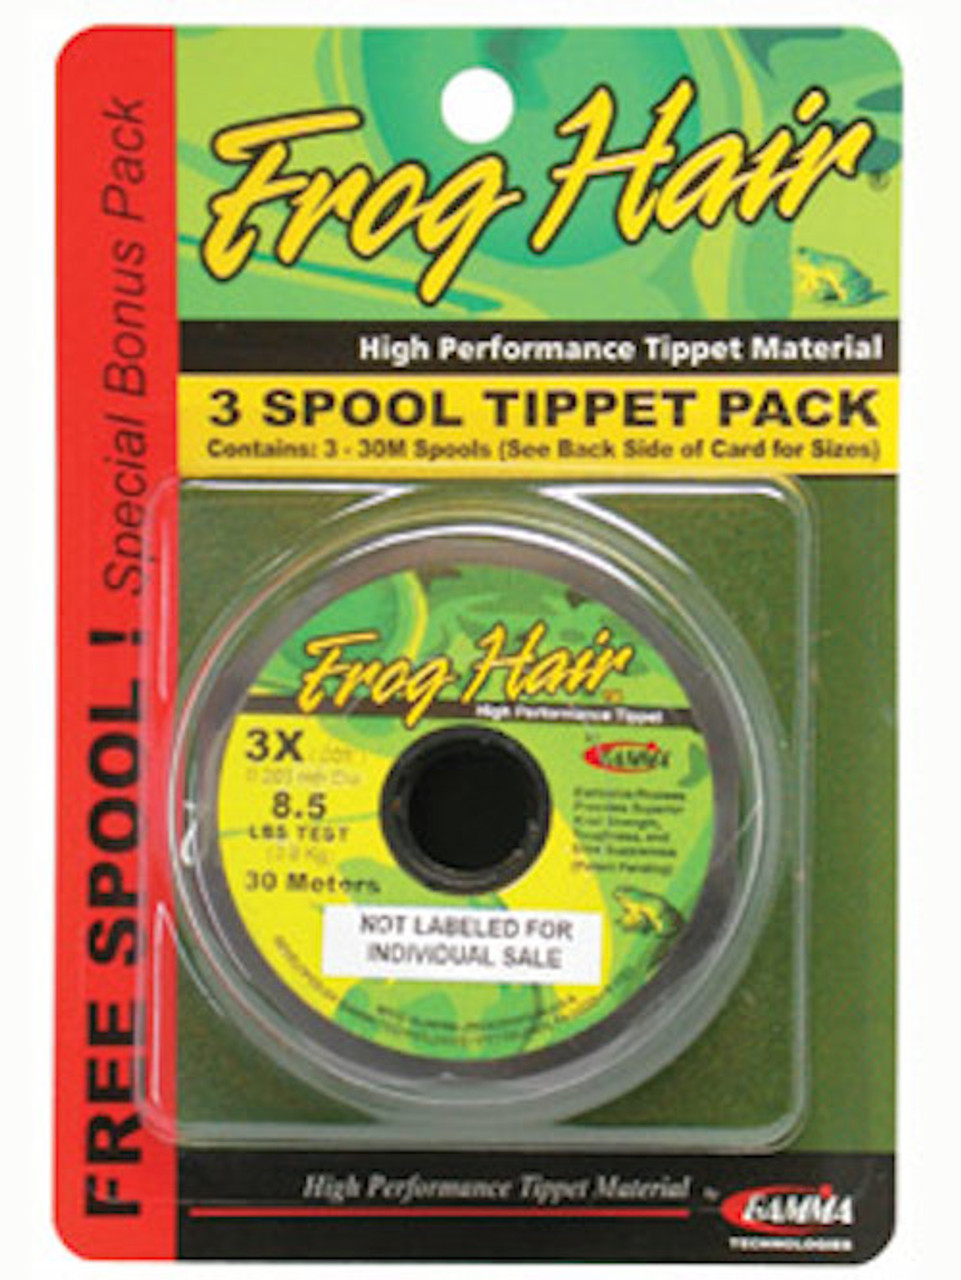 Frog Hair 3 Tippet Pack - Fly Fishing - Ed's Fly Shop